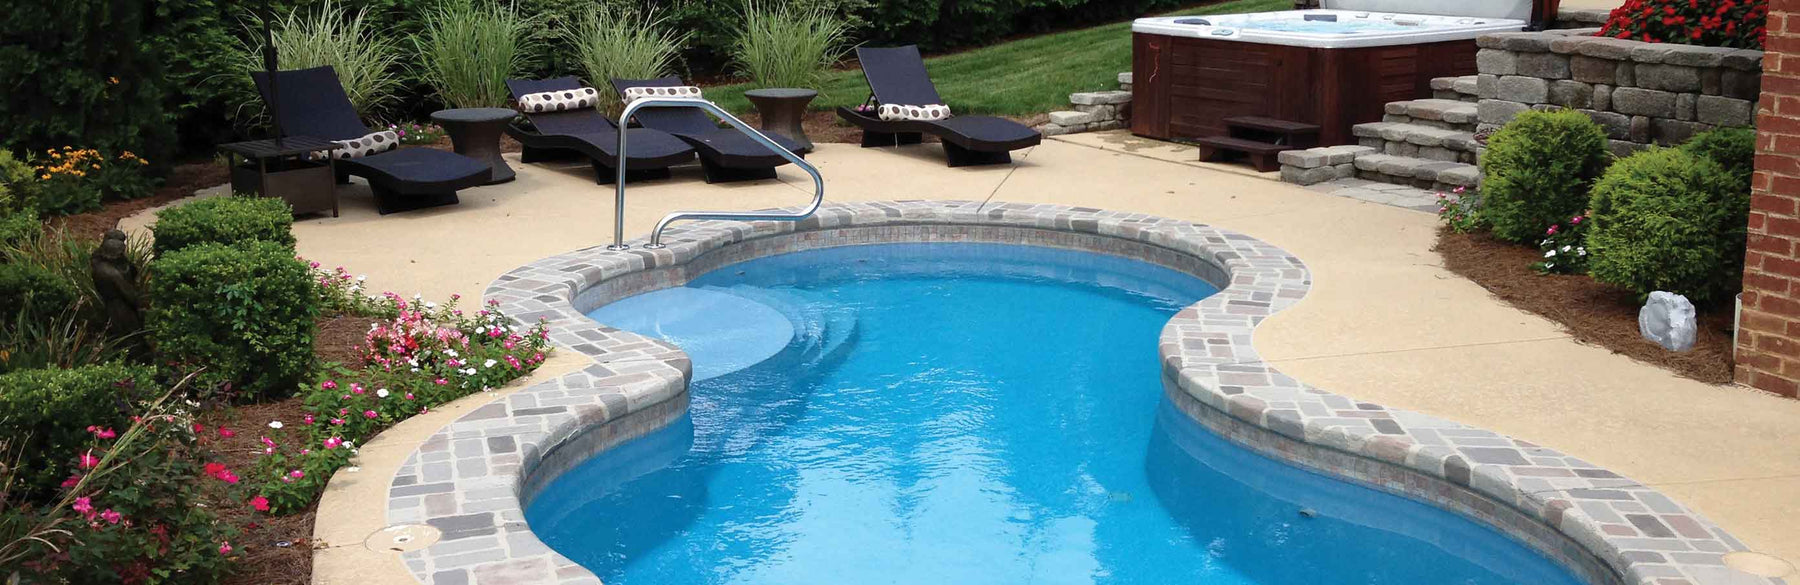 What Makes The Best Fiberglass Pools Last So Long? (Part I) - Great Backyard Place